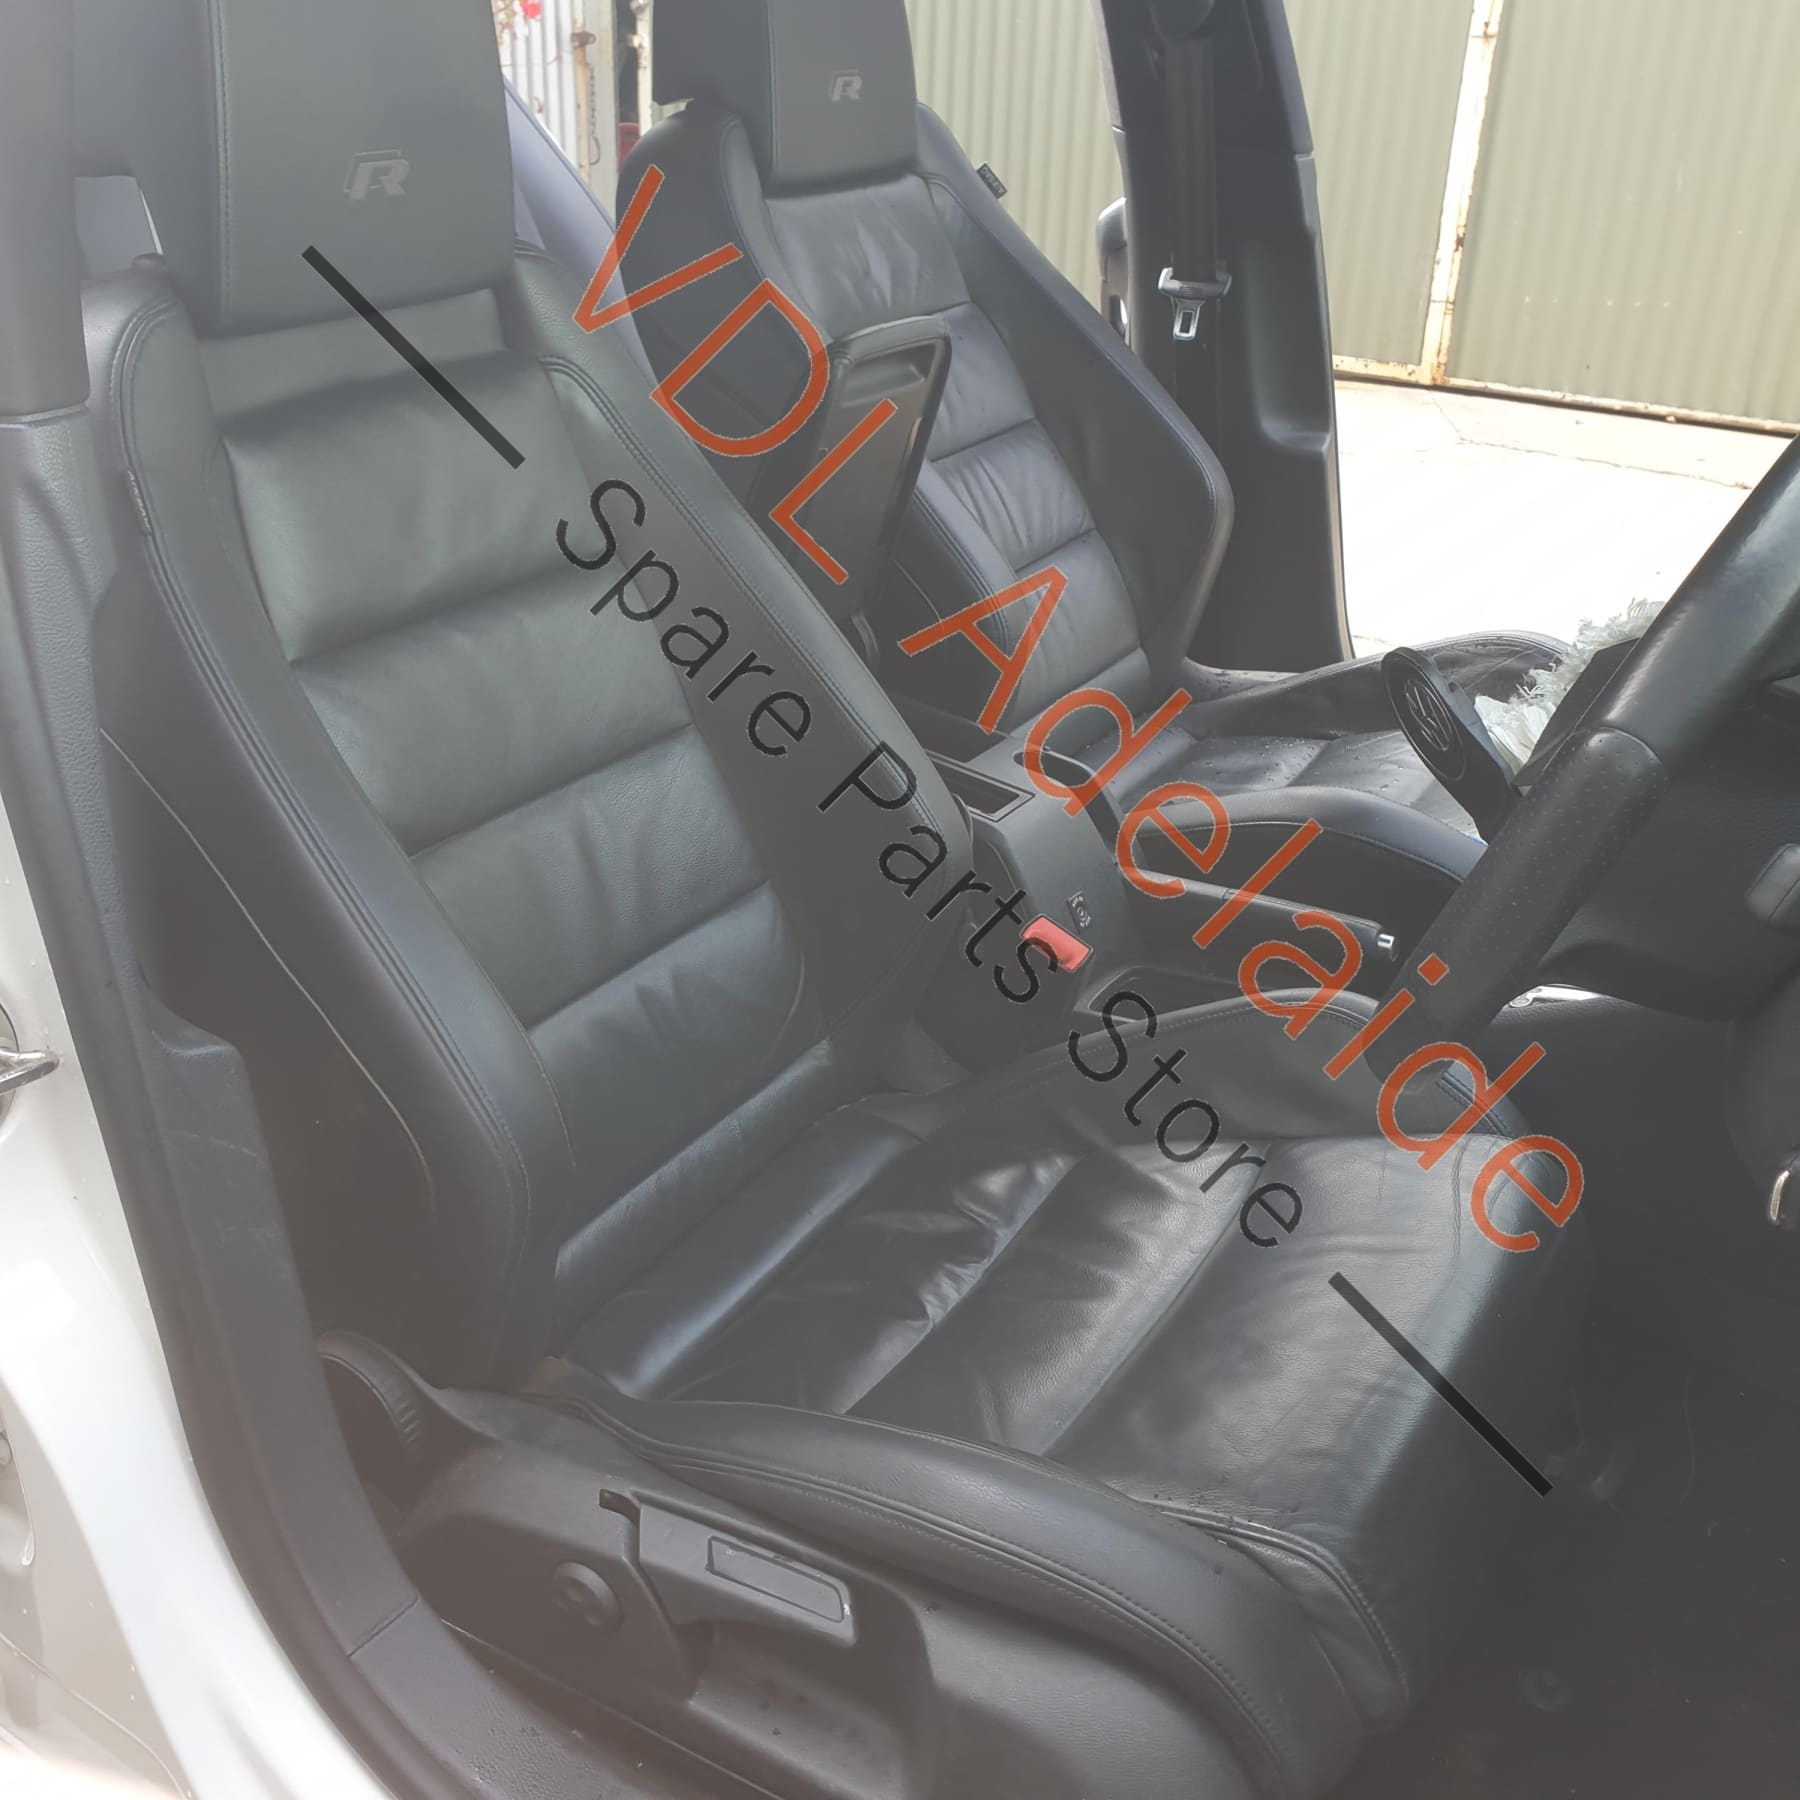     VW Golf R / Gti MK6 Black Leather Front Right Drivers Seat with Heating